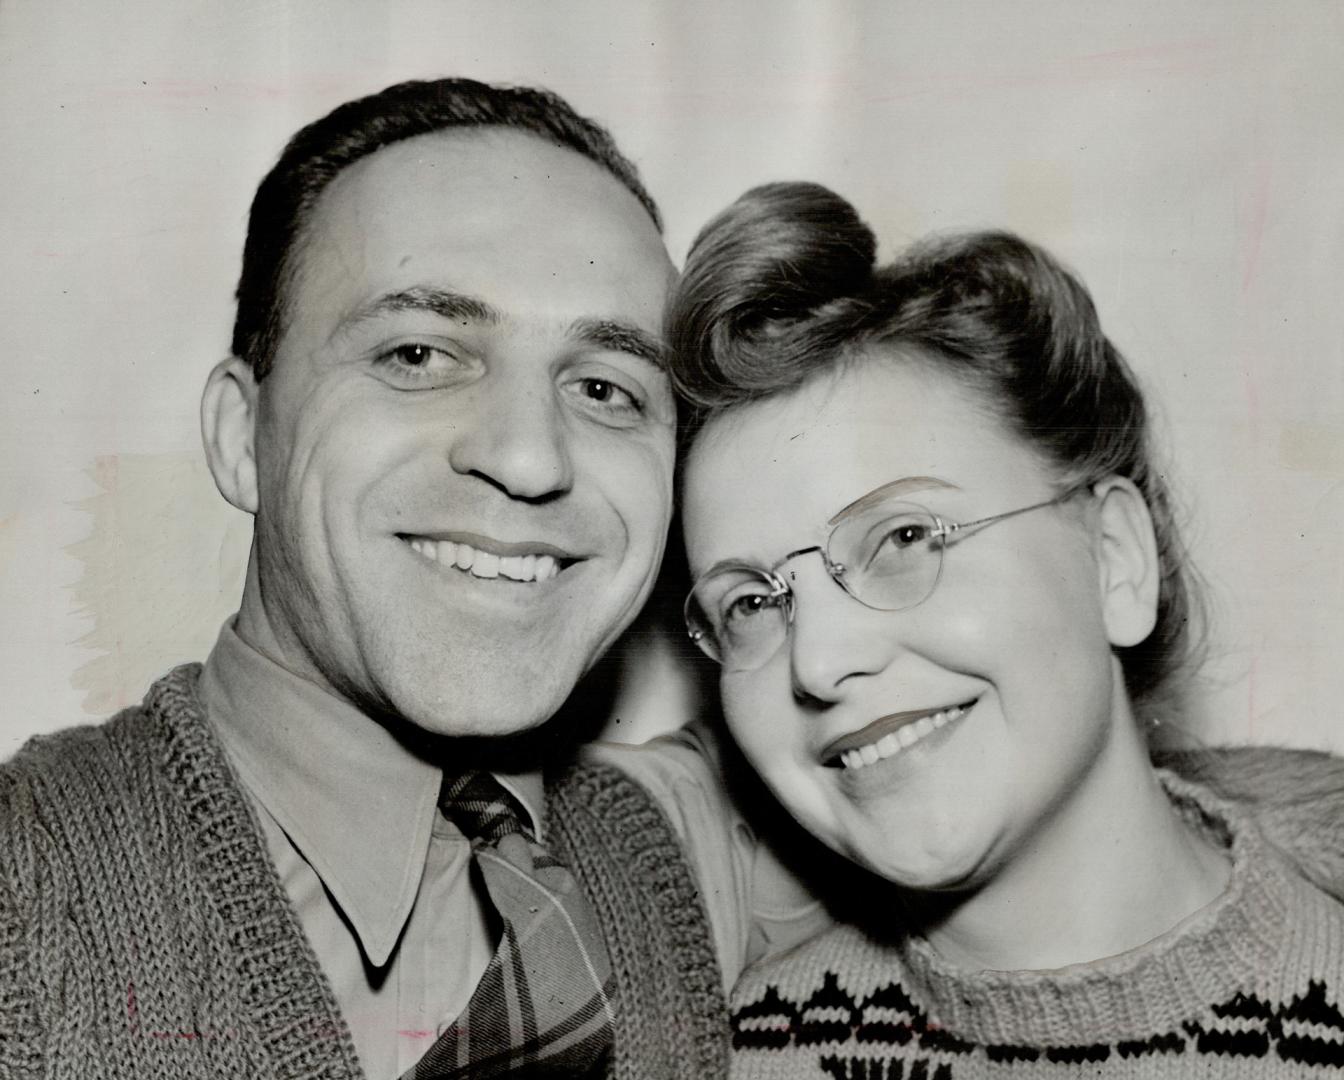 Former employee of Research Enterprises at Leaside and well-known in Toronto, Dr. David Shugar, shown with his wife